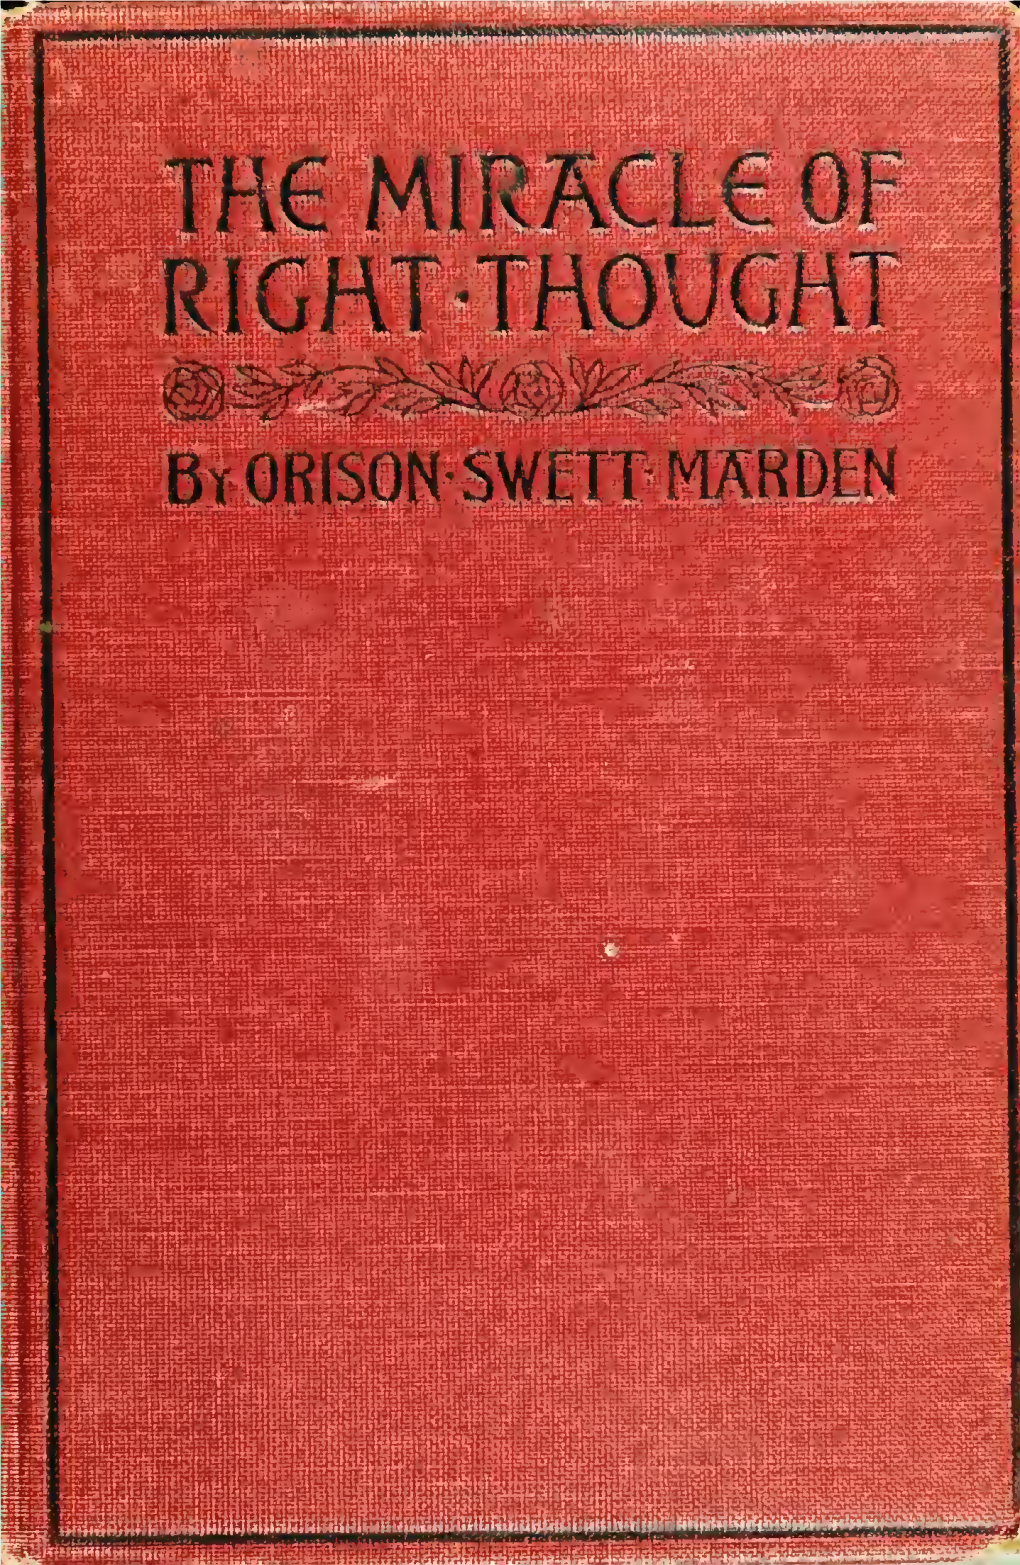 The Miracle of Right Thought by Orison Swett Marden the Marden Inspirational Books